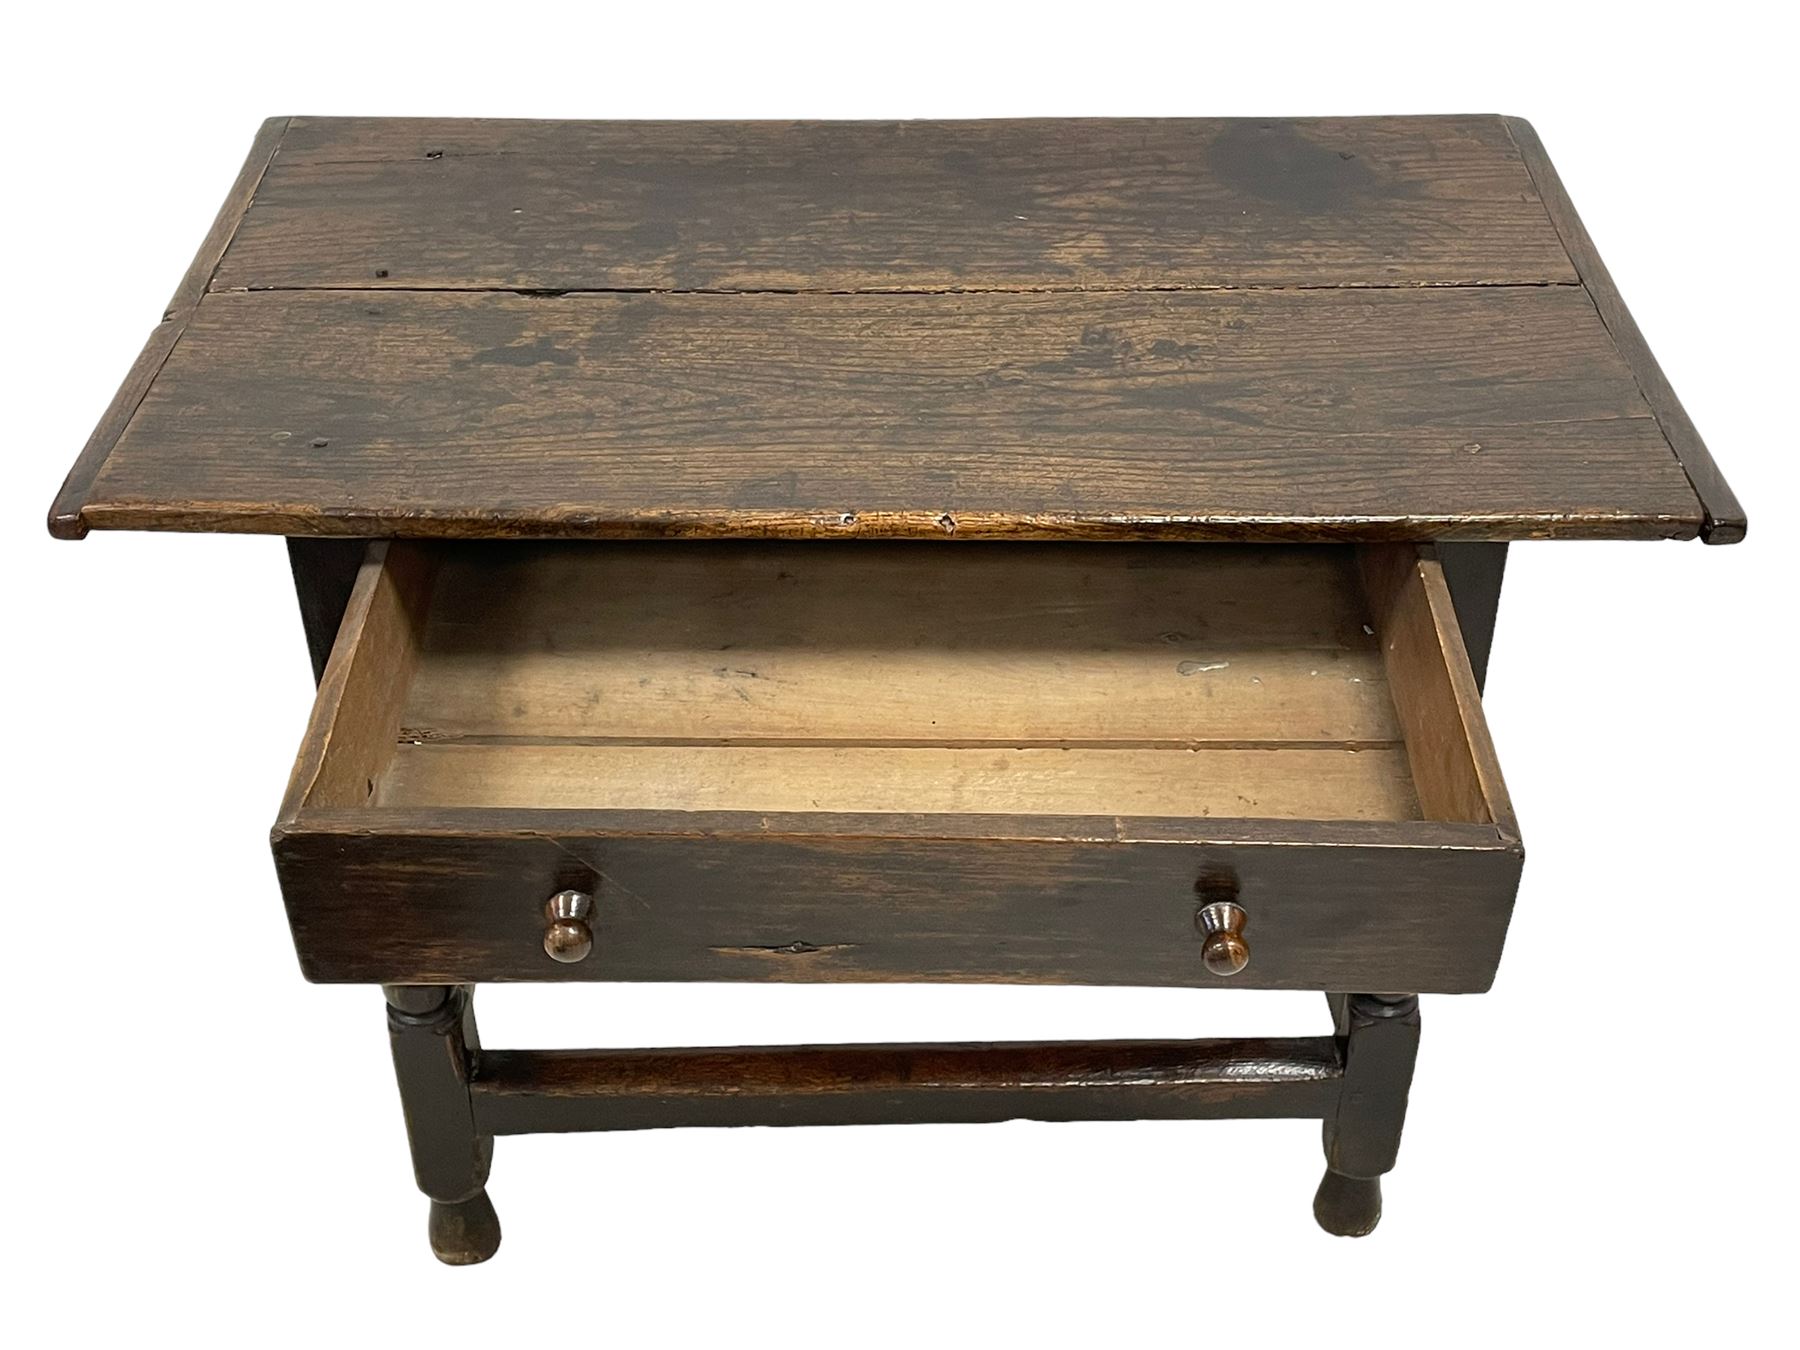 18th century oak side table - Image 7 of 7